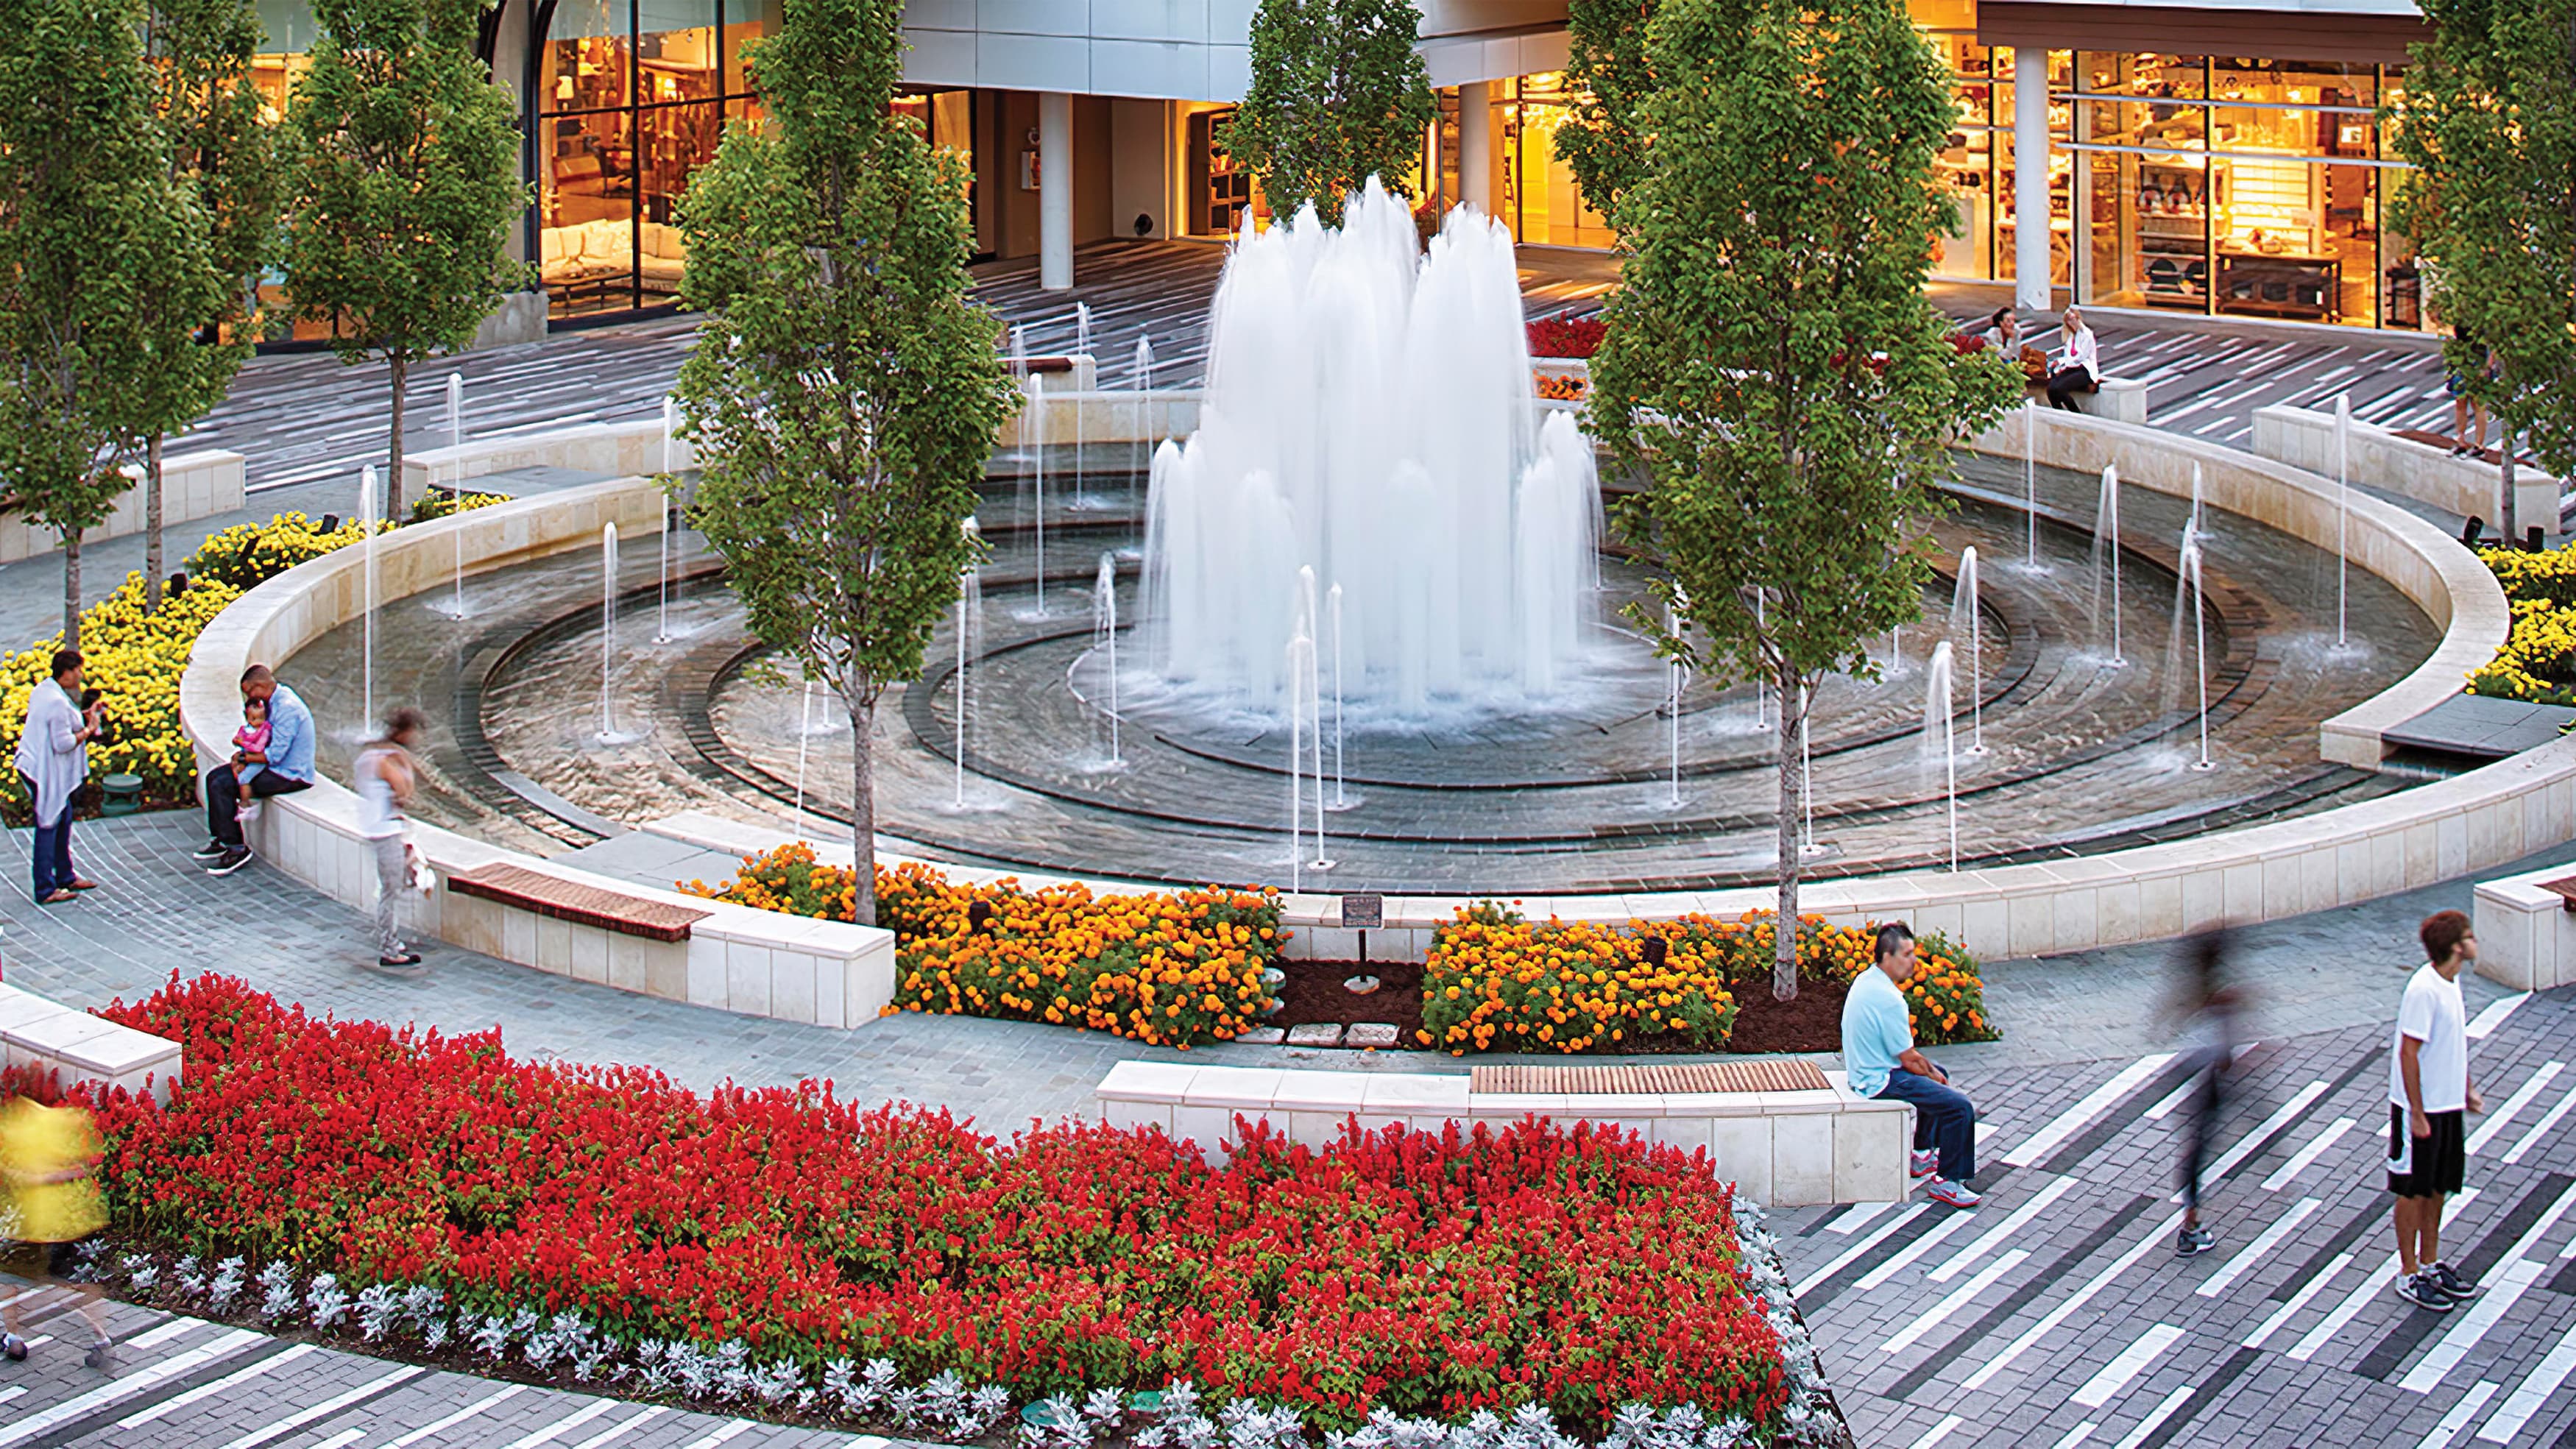 Fountain in center of plaza with surrounding seating and integrated flowered landscaping